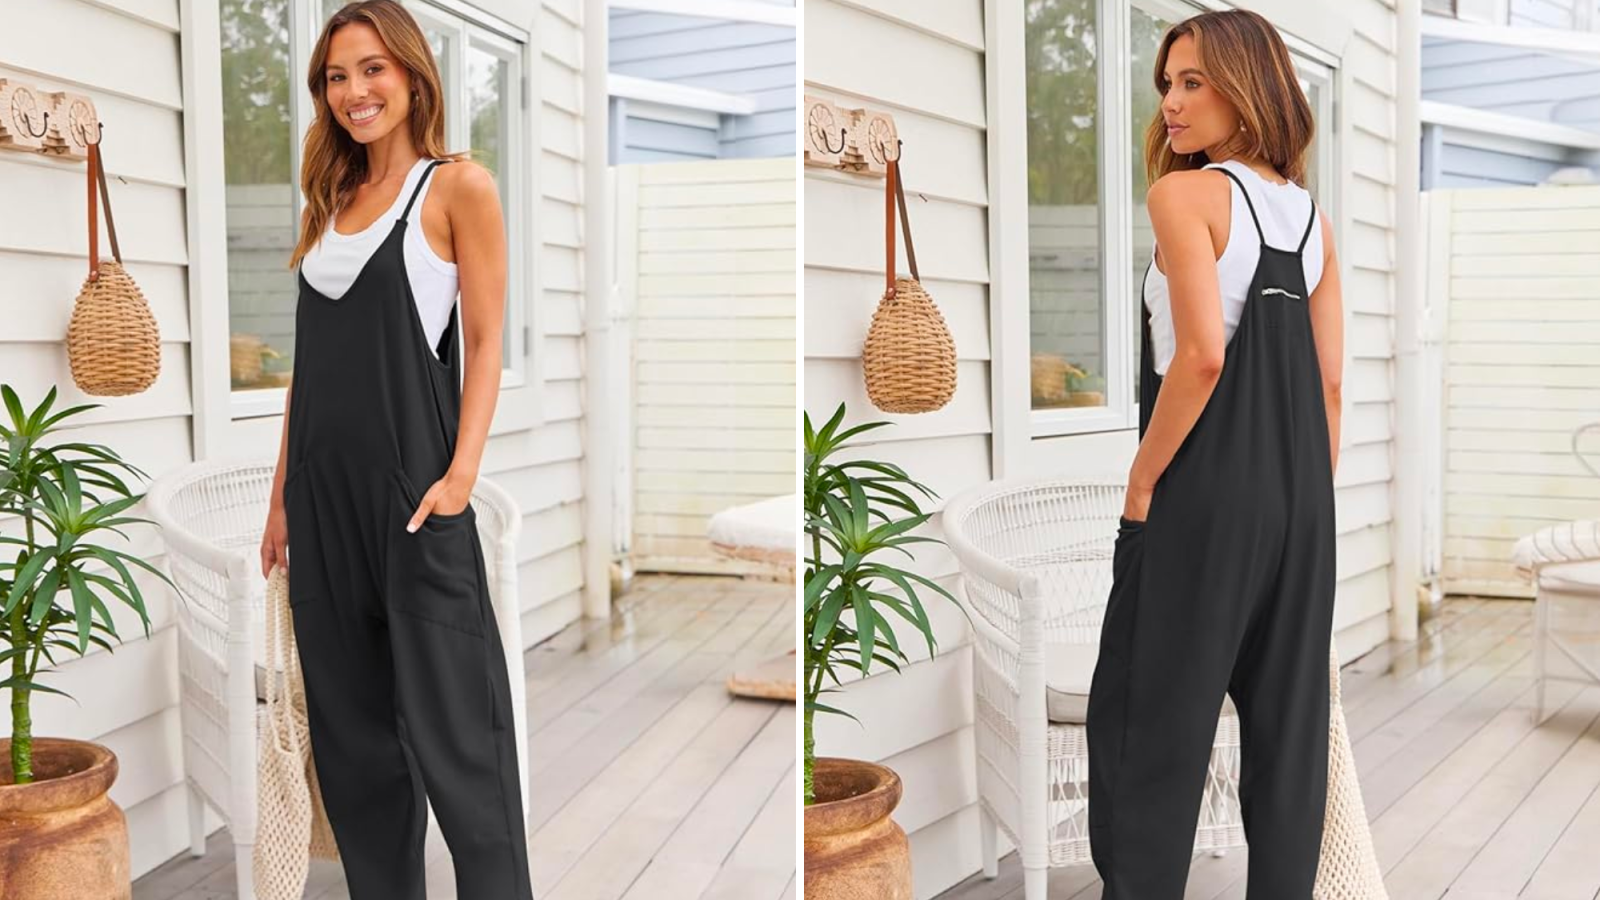 This Halara Jumpsuit Lookalike Is My Go-To Shopping Outfit